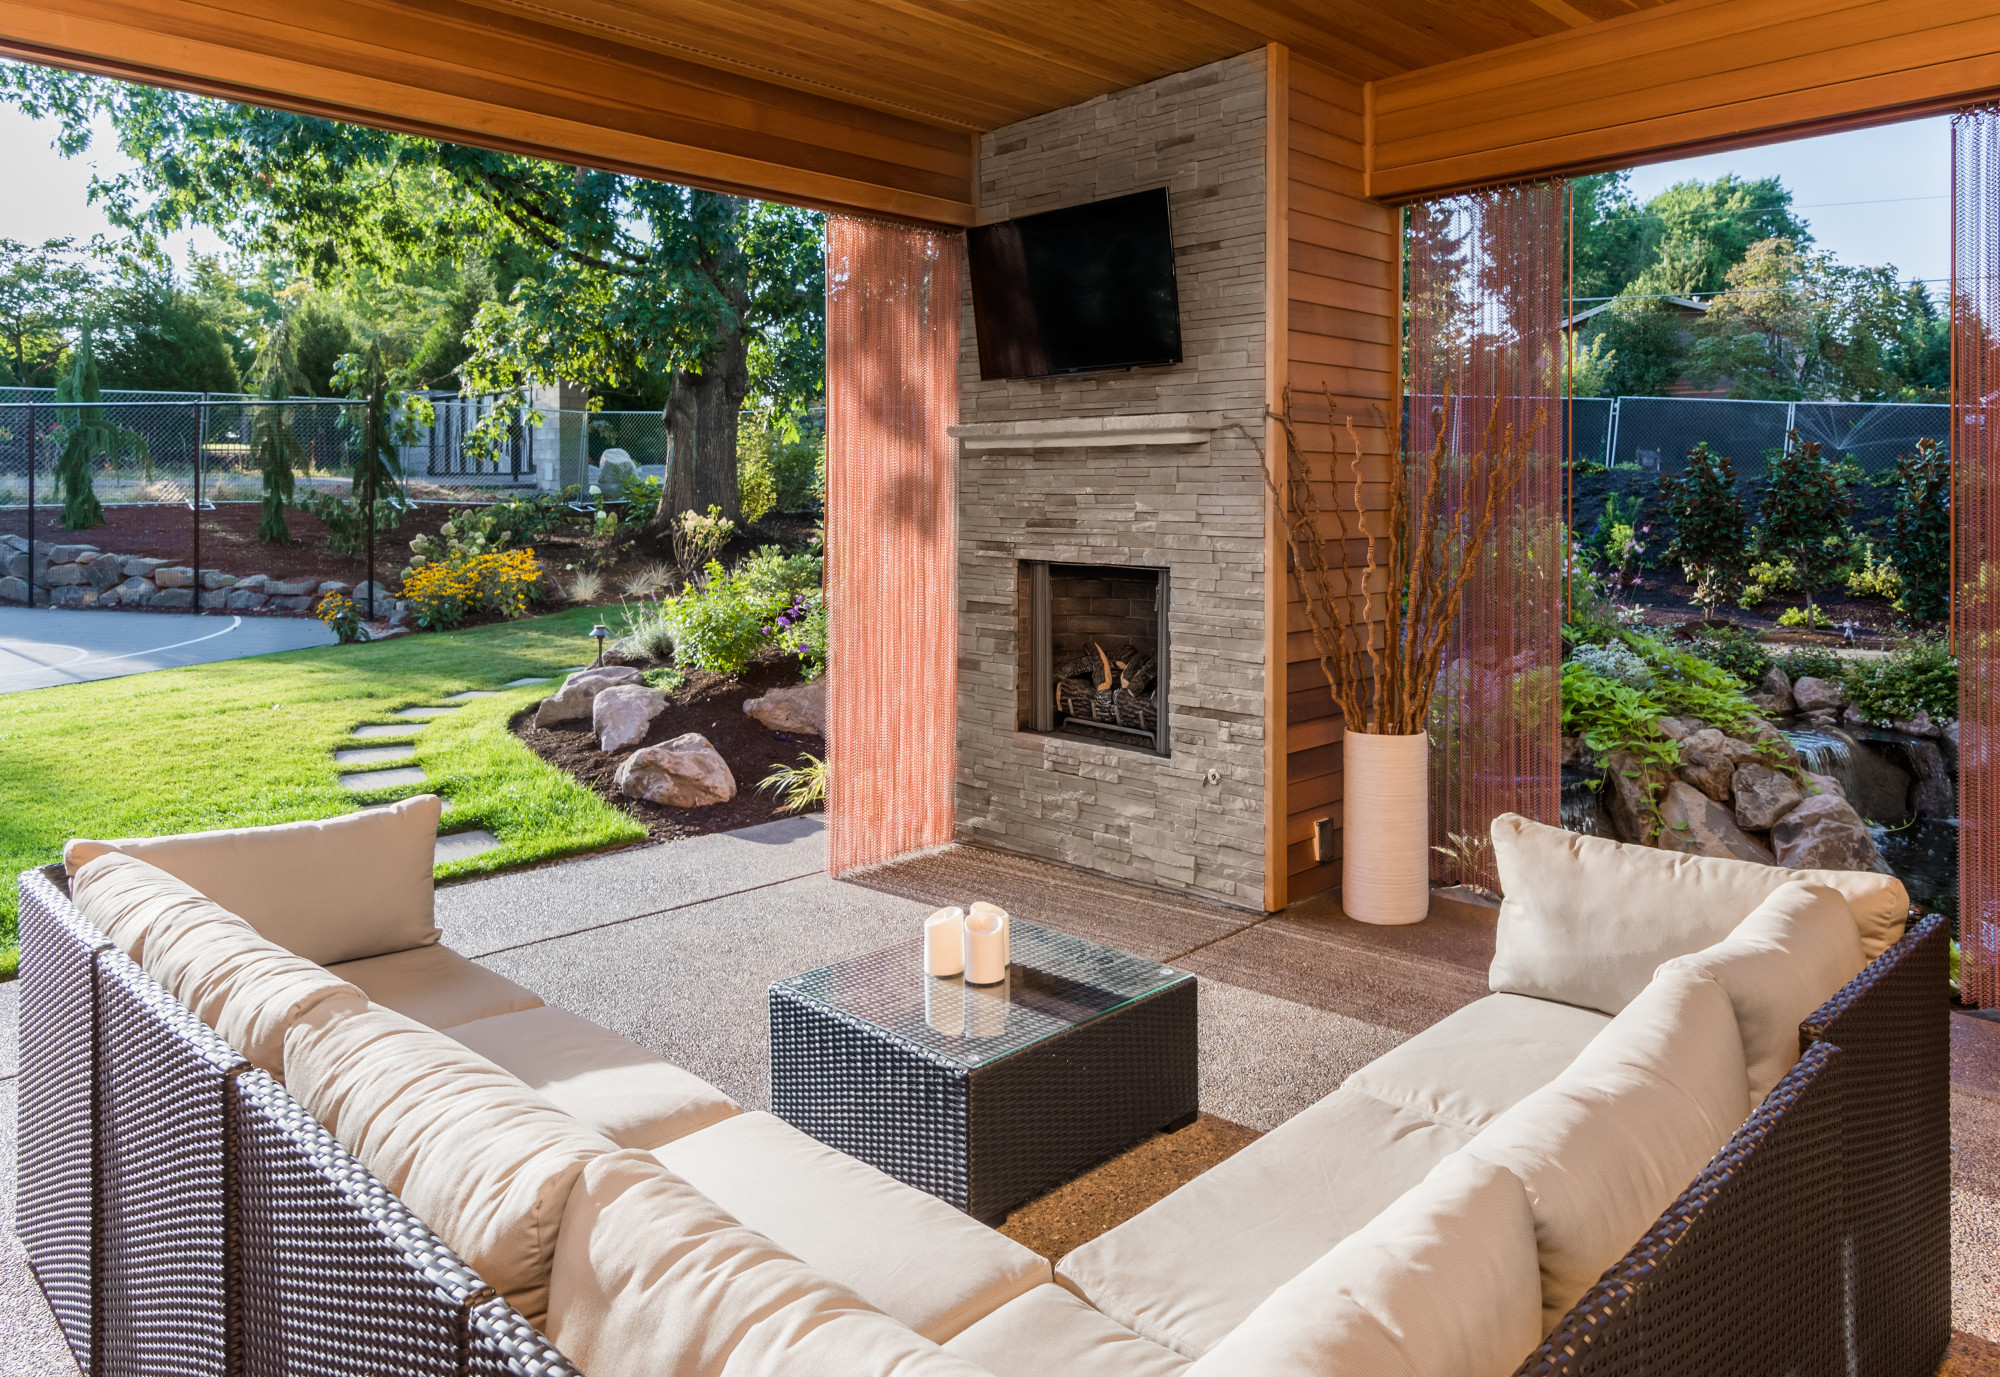 Your backyard is a special place where you can relax and reconnect with nature. Here are some easy backyard makeover ideas that can work on a budget.